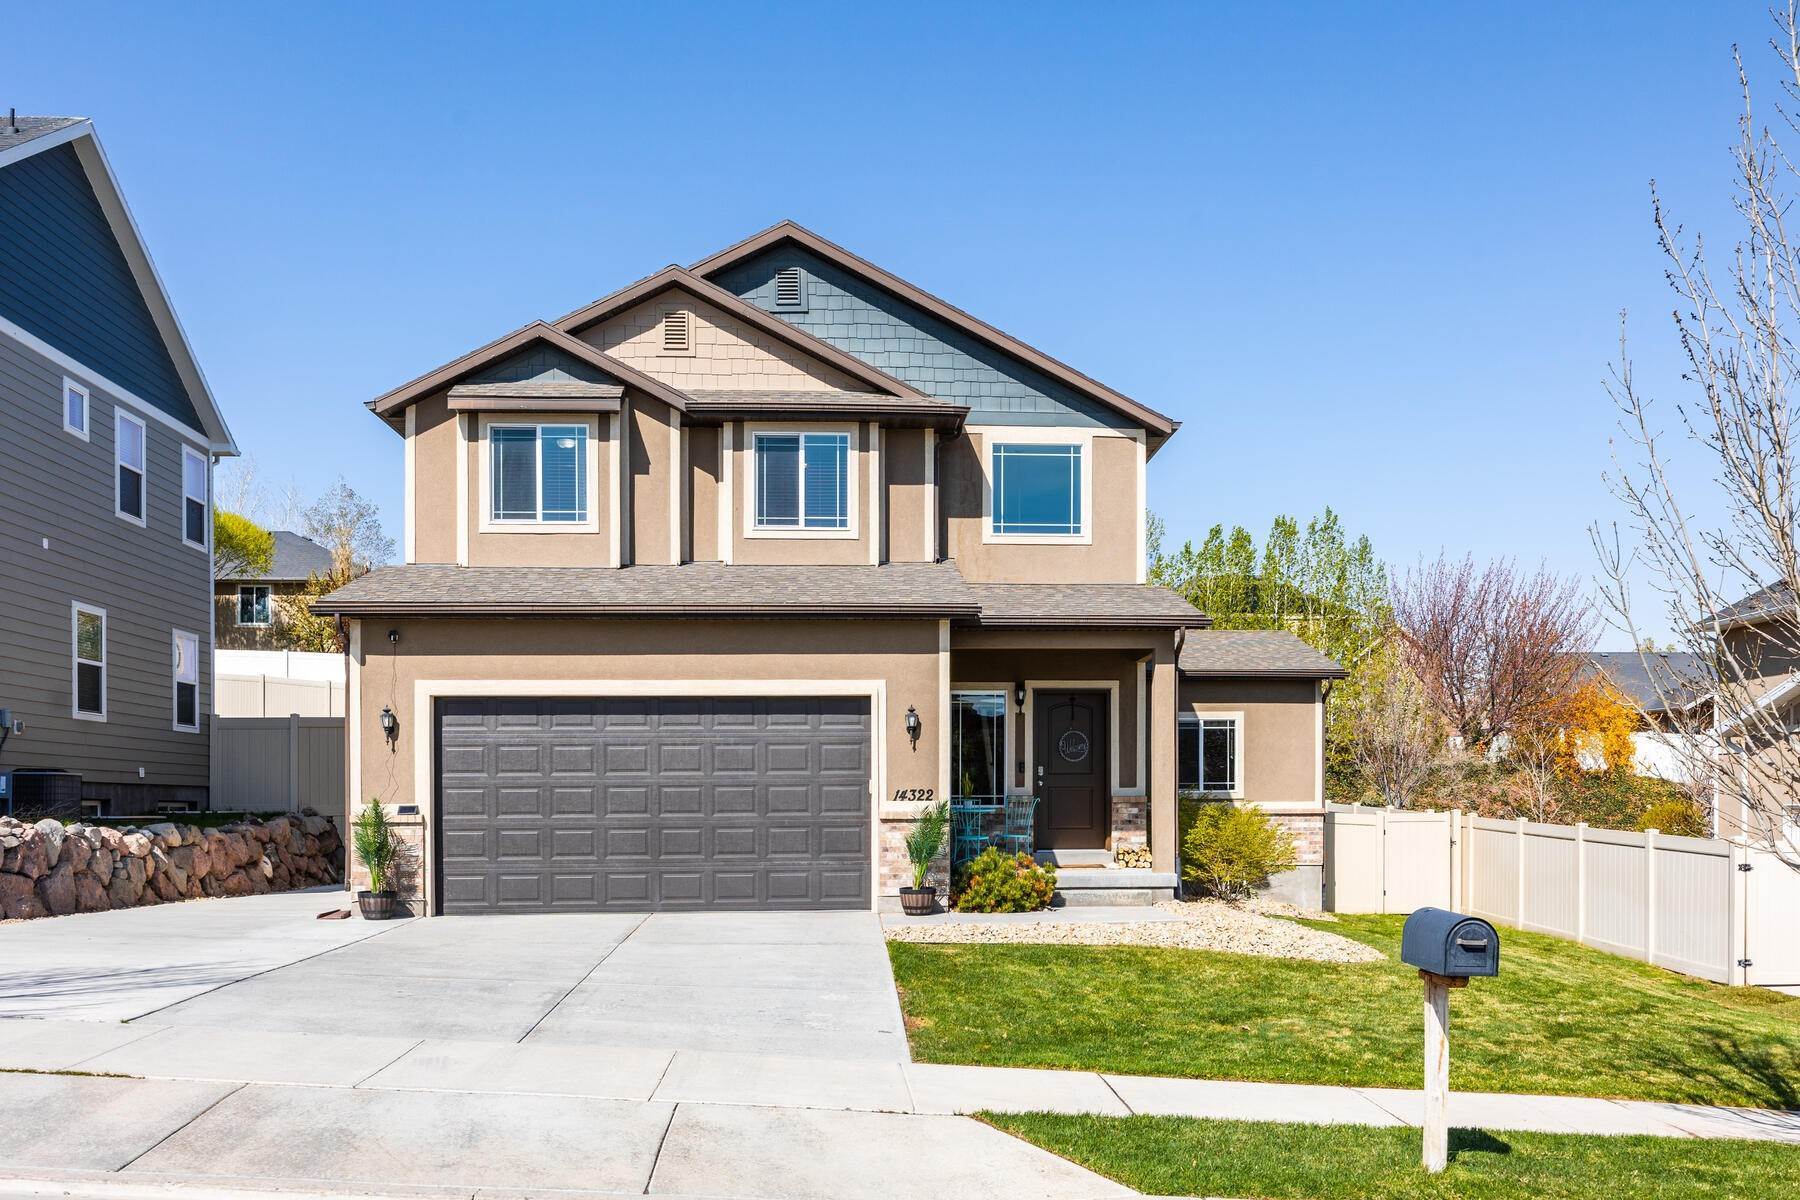 1. Single Family Homes for Sale at Come See What it Feels Like to Spread Your Wings 14322 S Highfield Dr Herriman, Utah 84096 United States